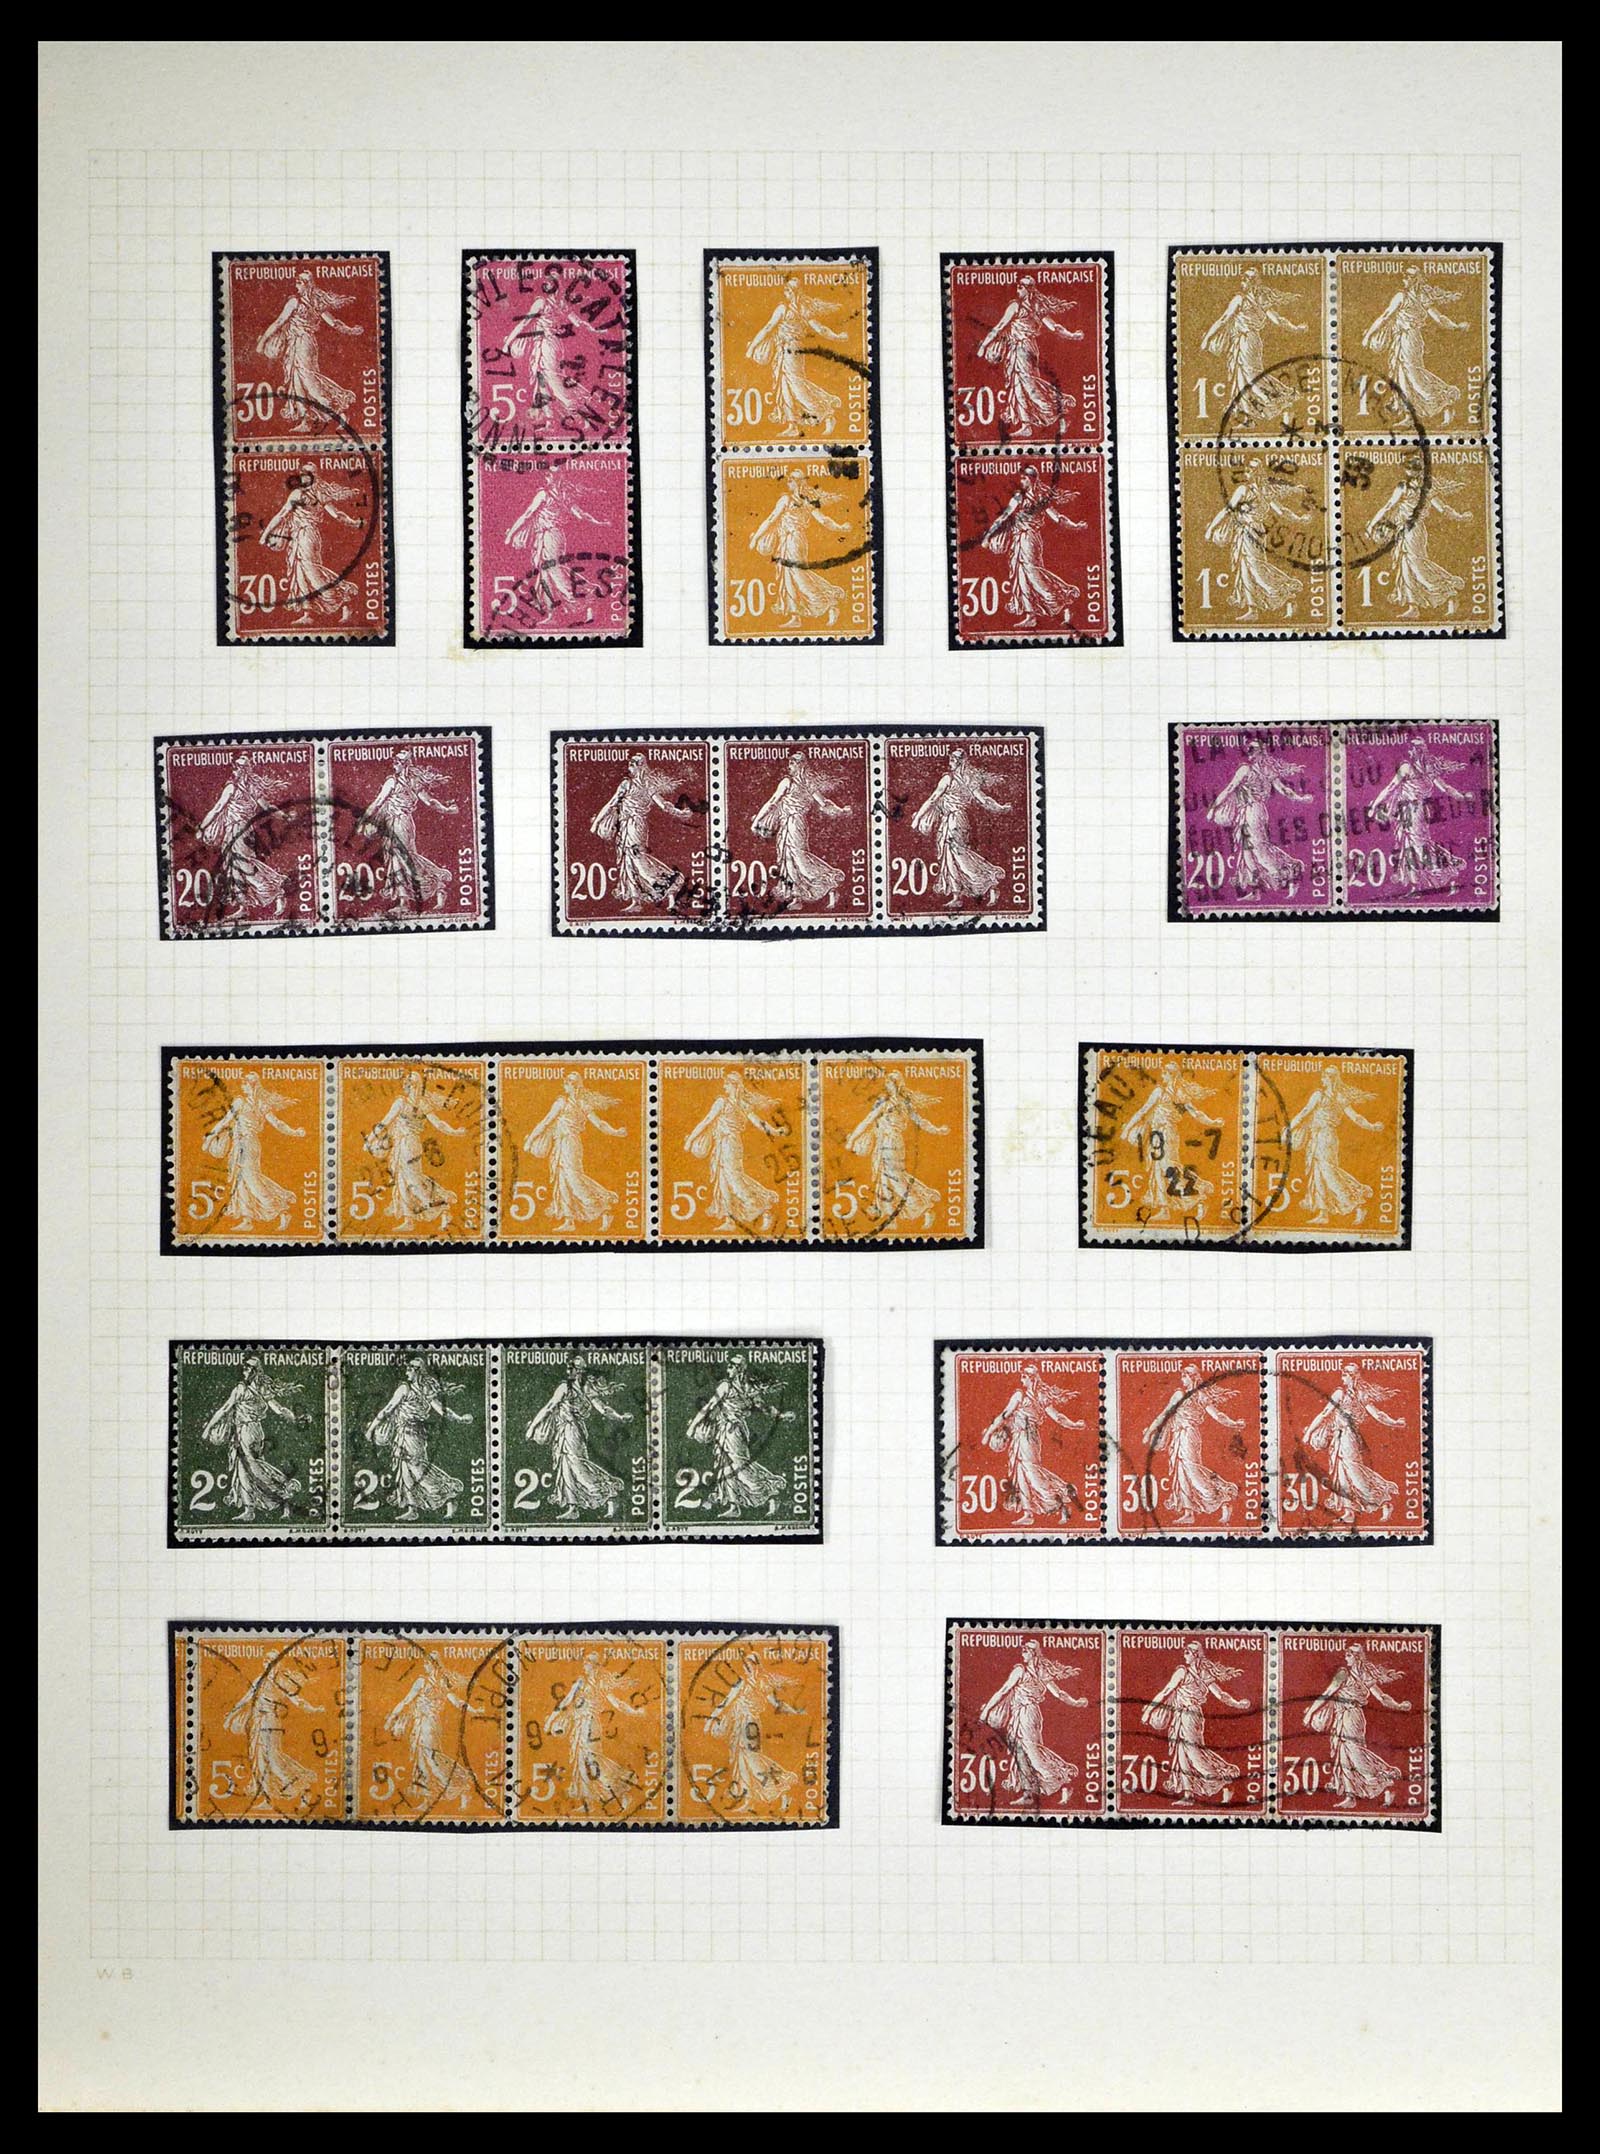 39329 0061 - Stamp collection 39329 France Semeuse.